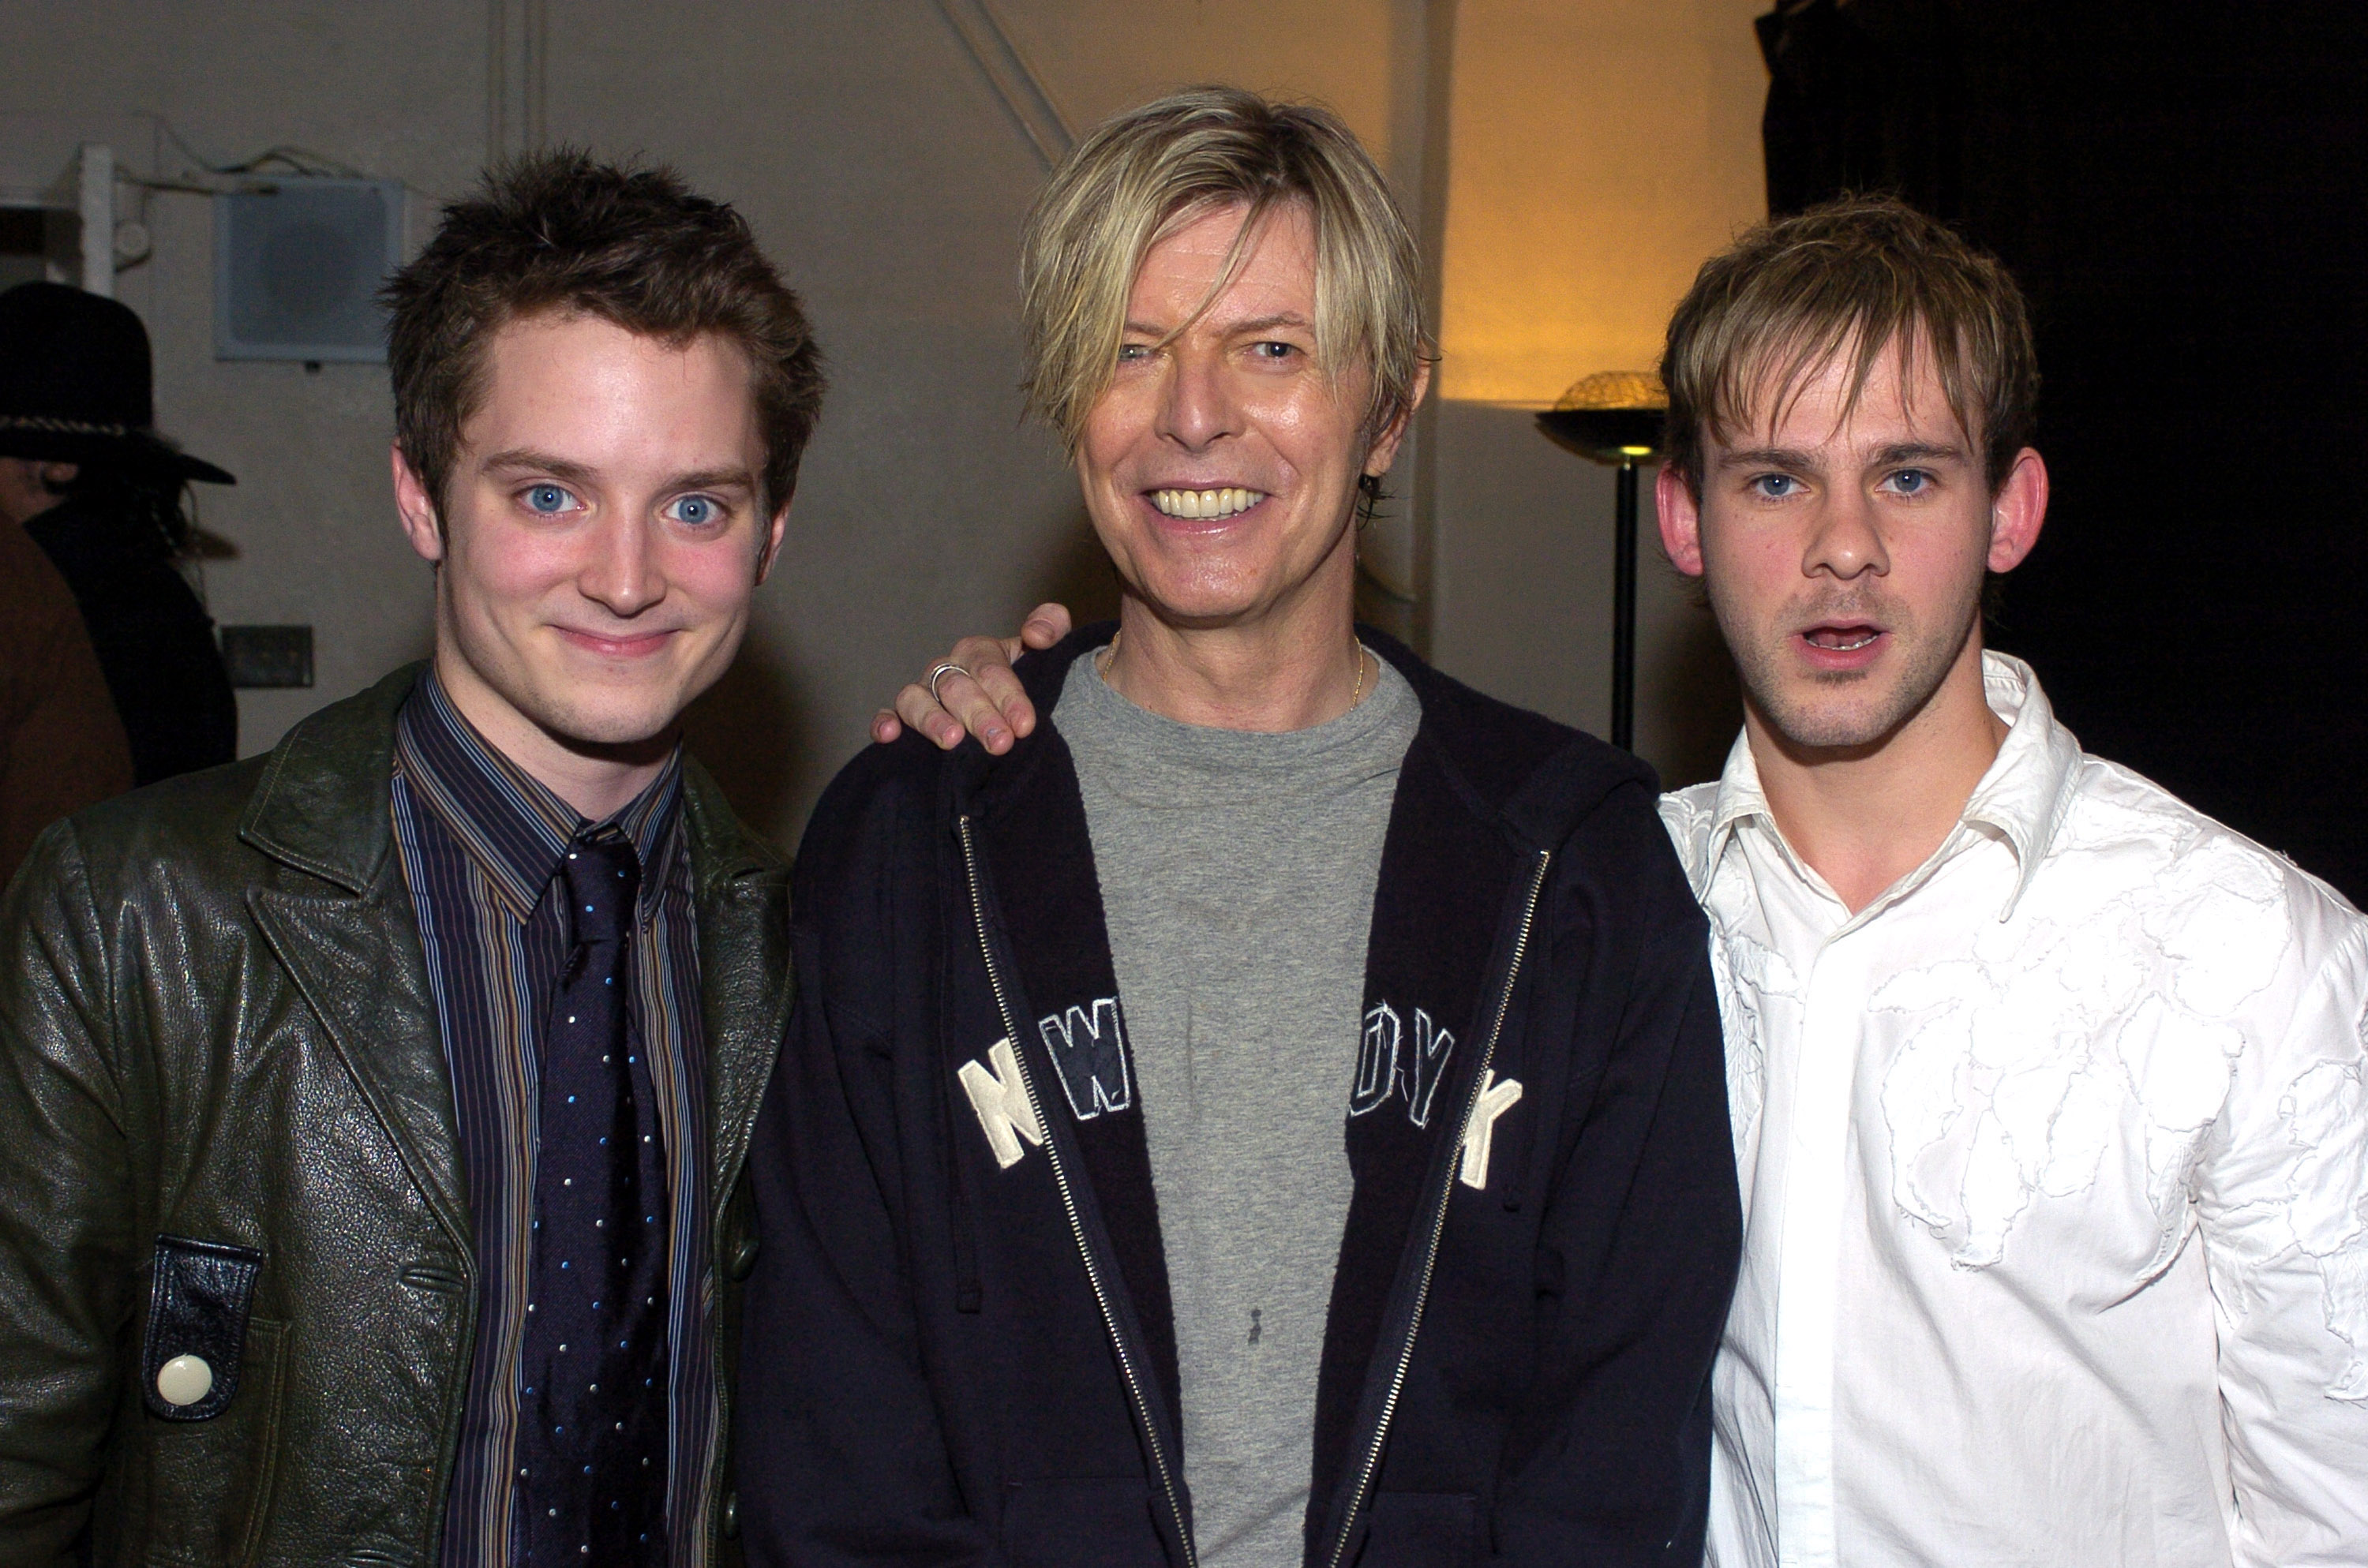 "The Lord of the Rings" Trilogy stars Elijah Wood(L) and Dominic Monaghan (R) with David Bowie seen backstage at BOWIE's first concert visit to Los Angeles in nearly seven years.